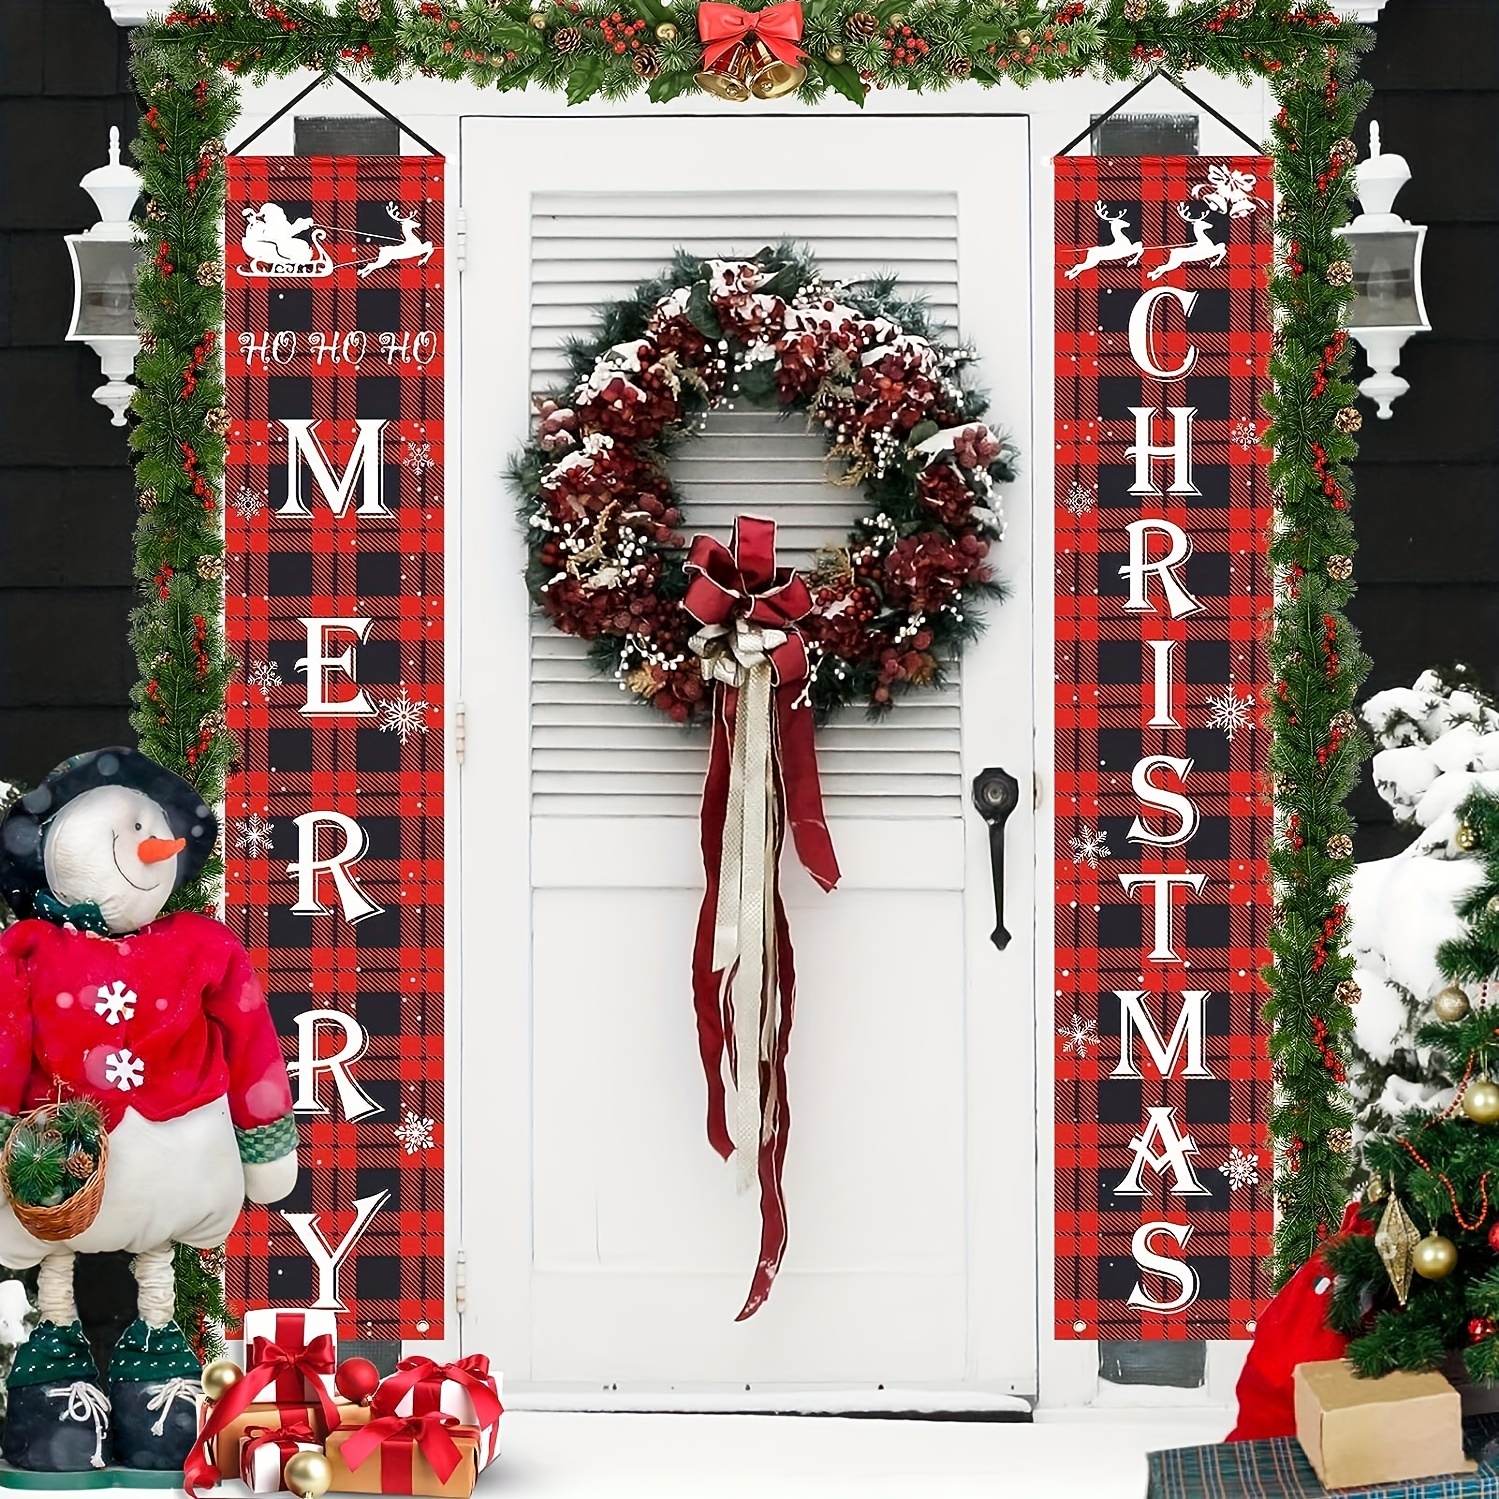 Christmas Wreath for Front Door,Black White Buffalo Plaid Kitchen Decor W/light,welcome Sign for Front Door,Buffalo Check Farmhouse Wall Decoration,ho